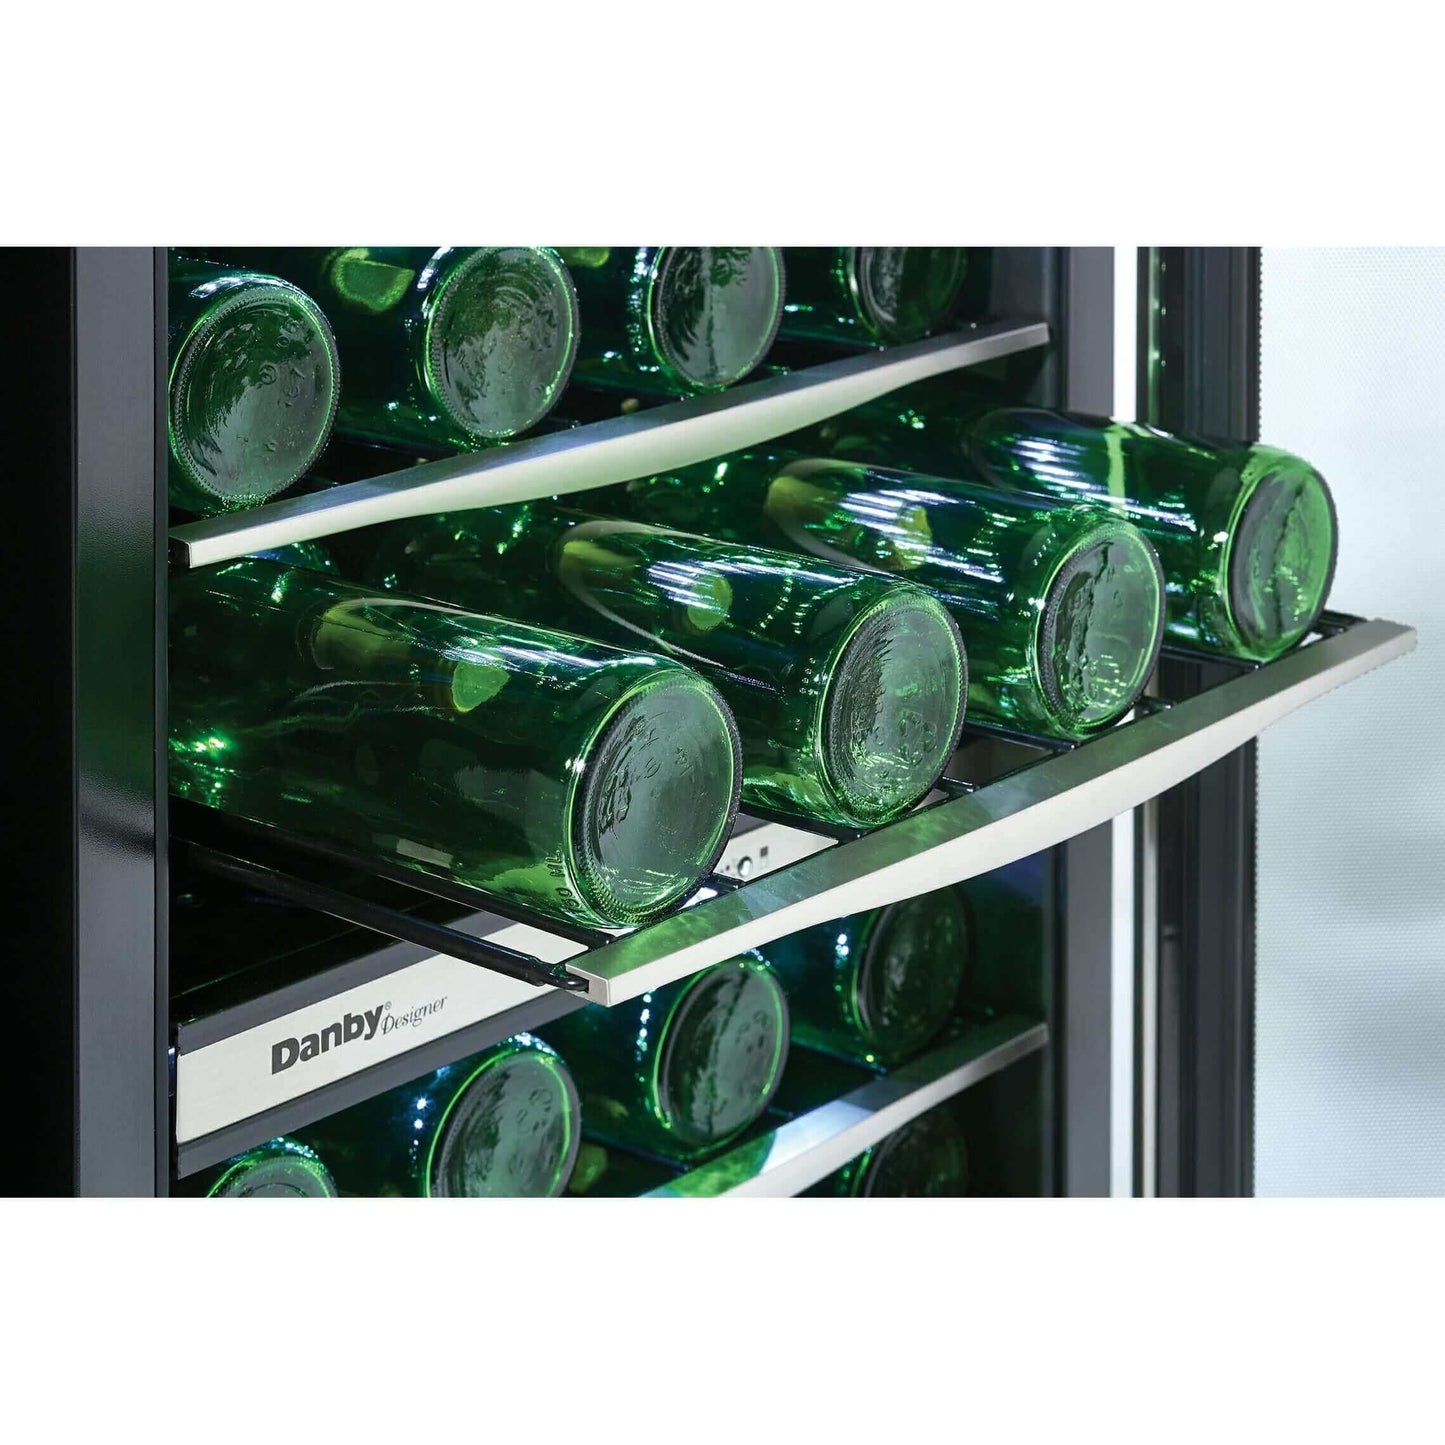 Danby 38 Bottle Free-Standing Wine Cooler in Stainless Steel